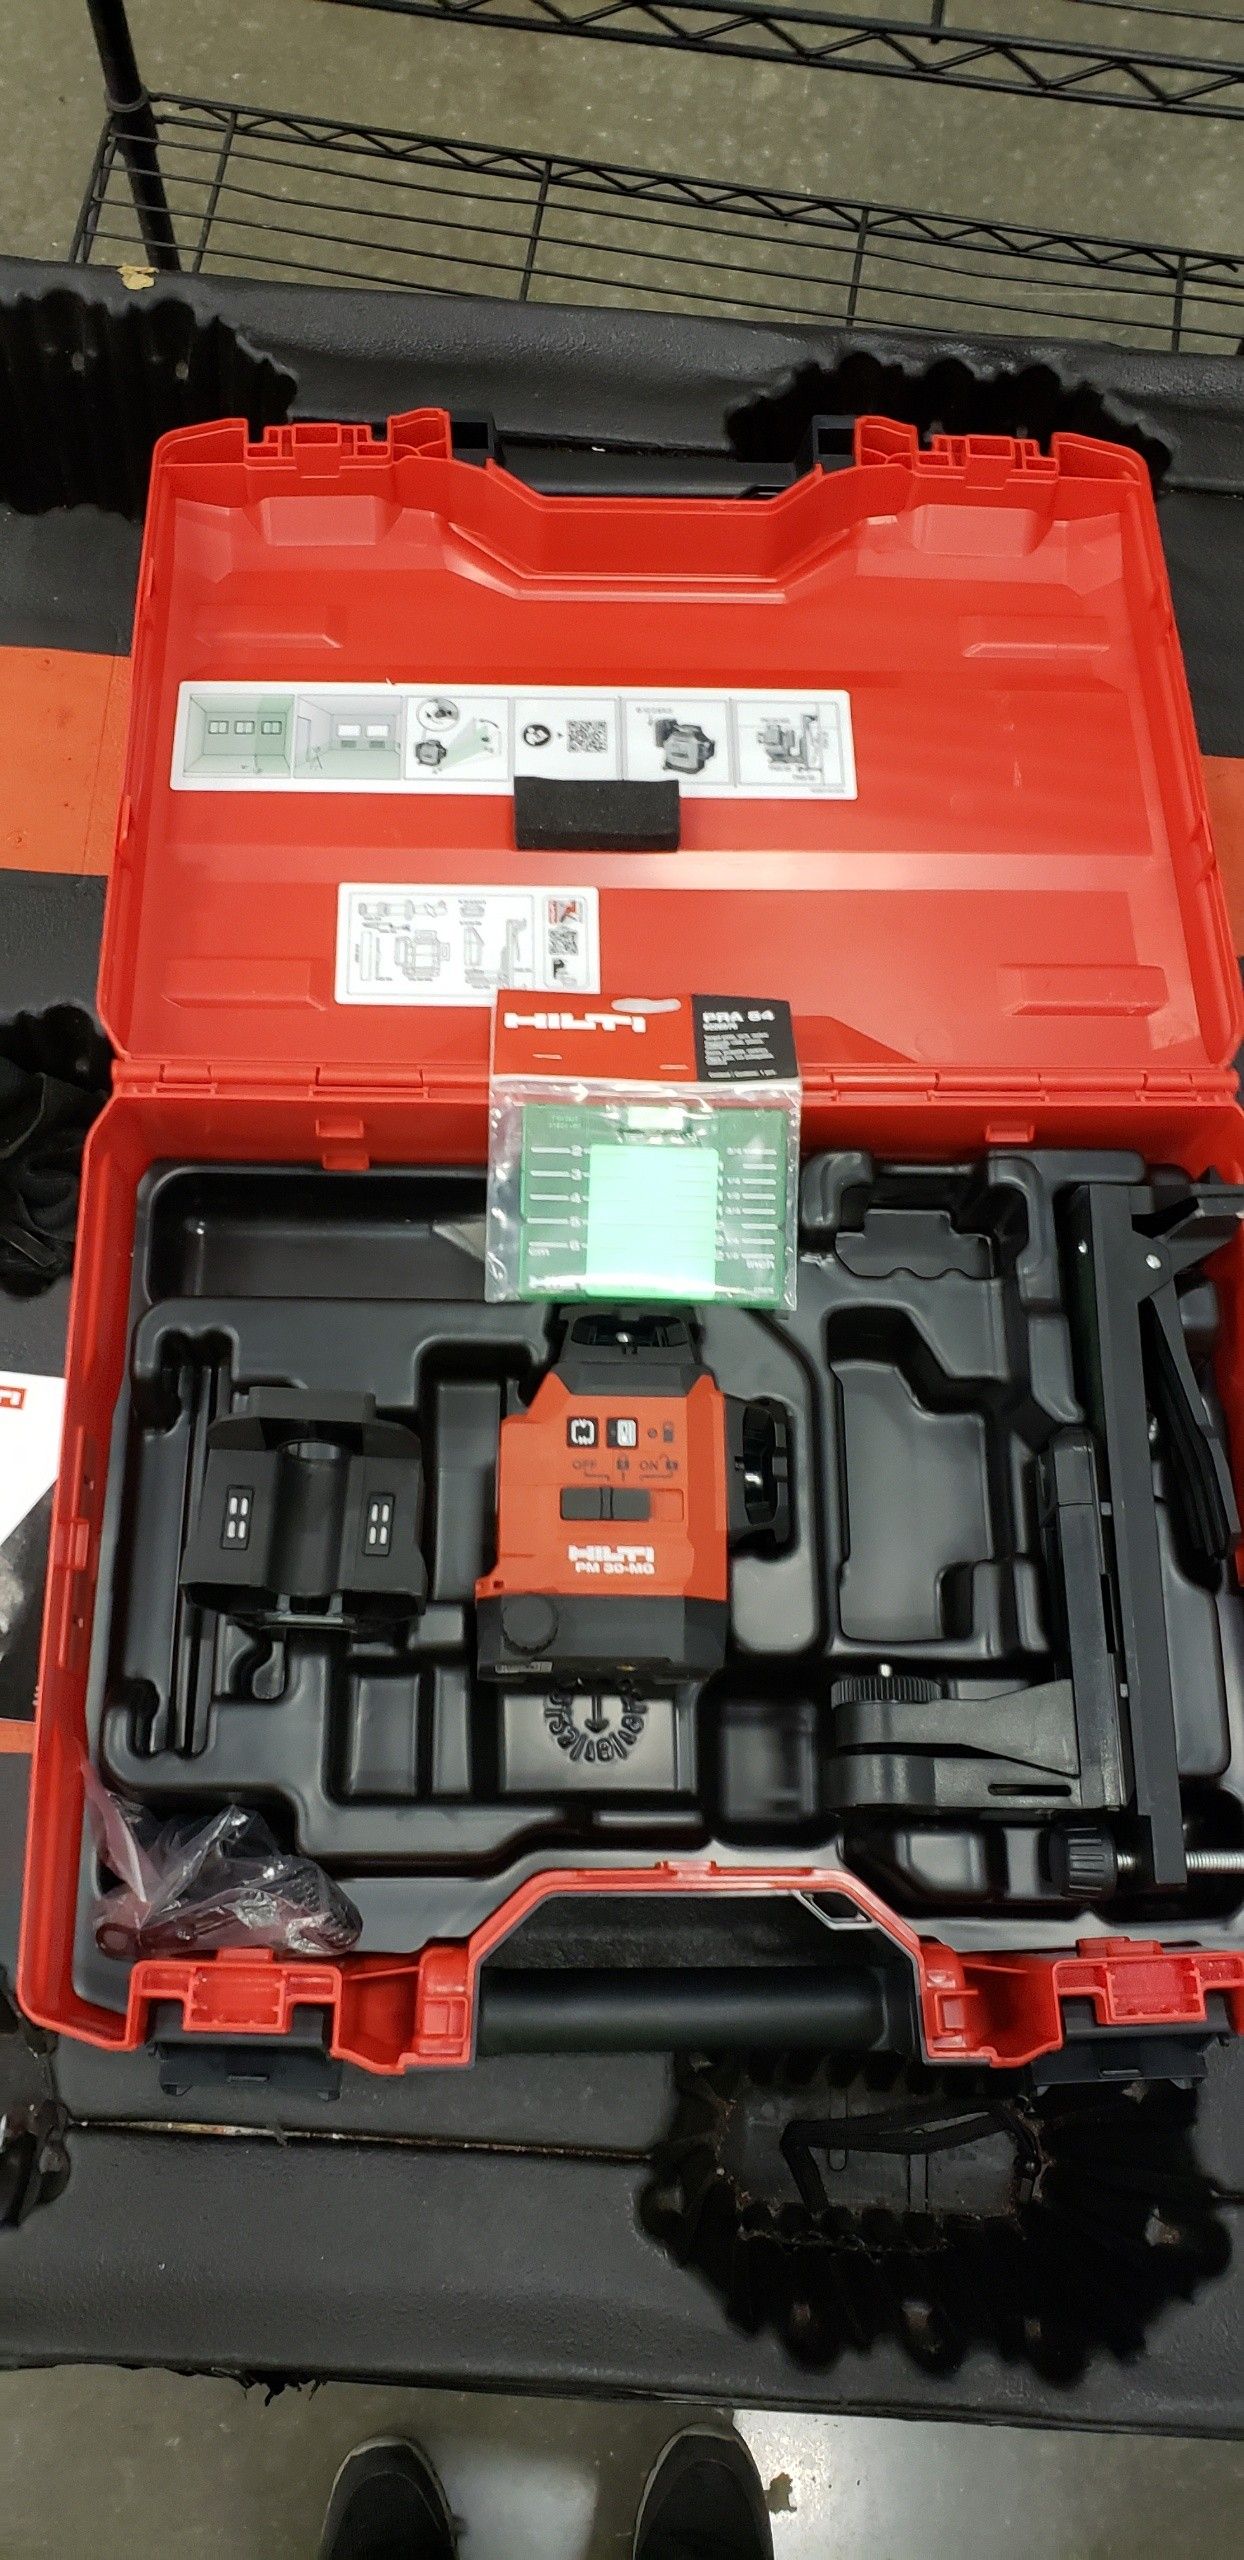 Hilti pm 30 green laser 12v brand new with battery and charger